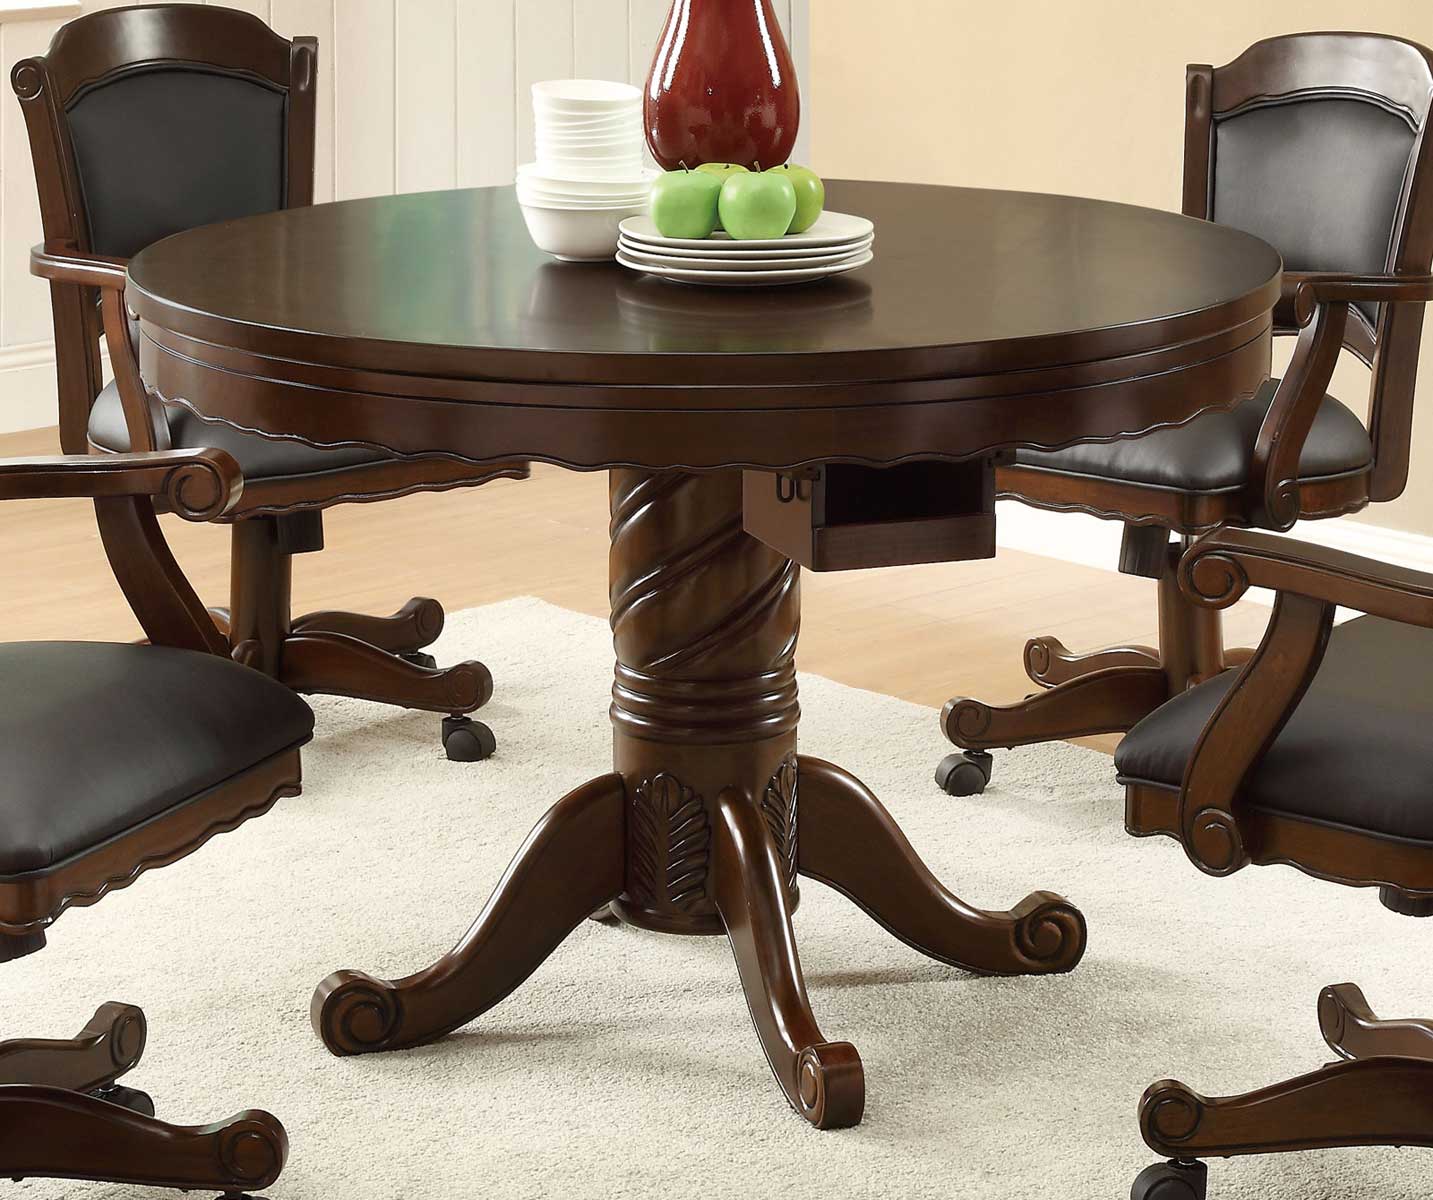 Coaster Turk 3-in-One Game Table - Cherry